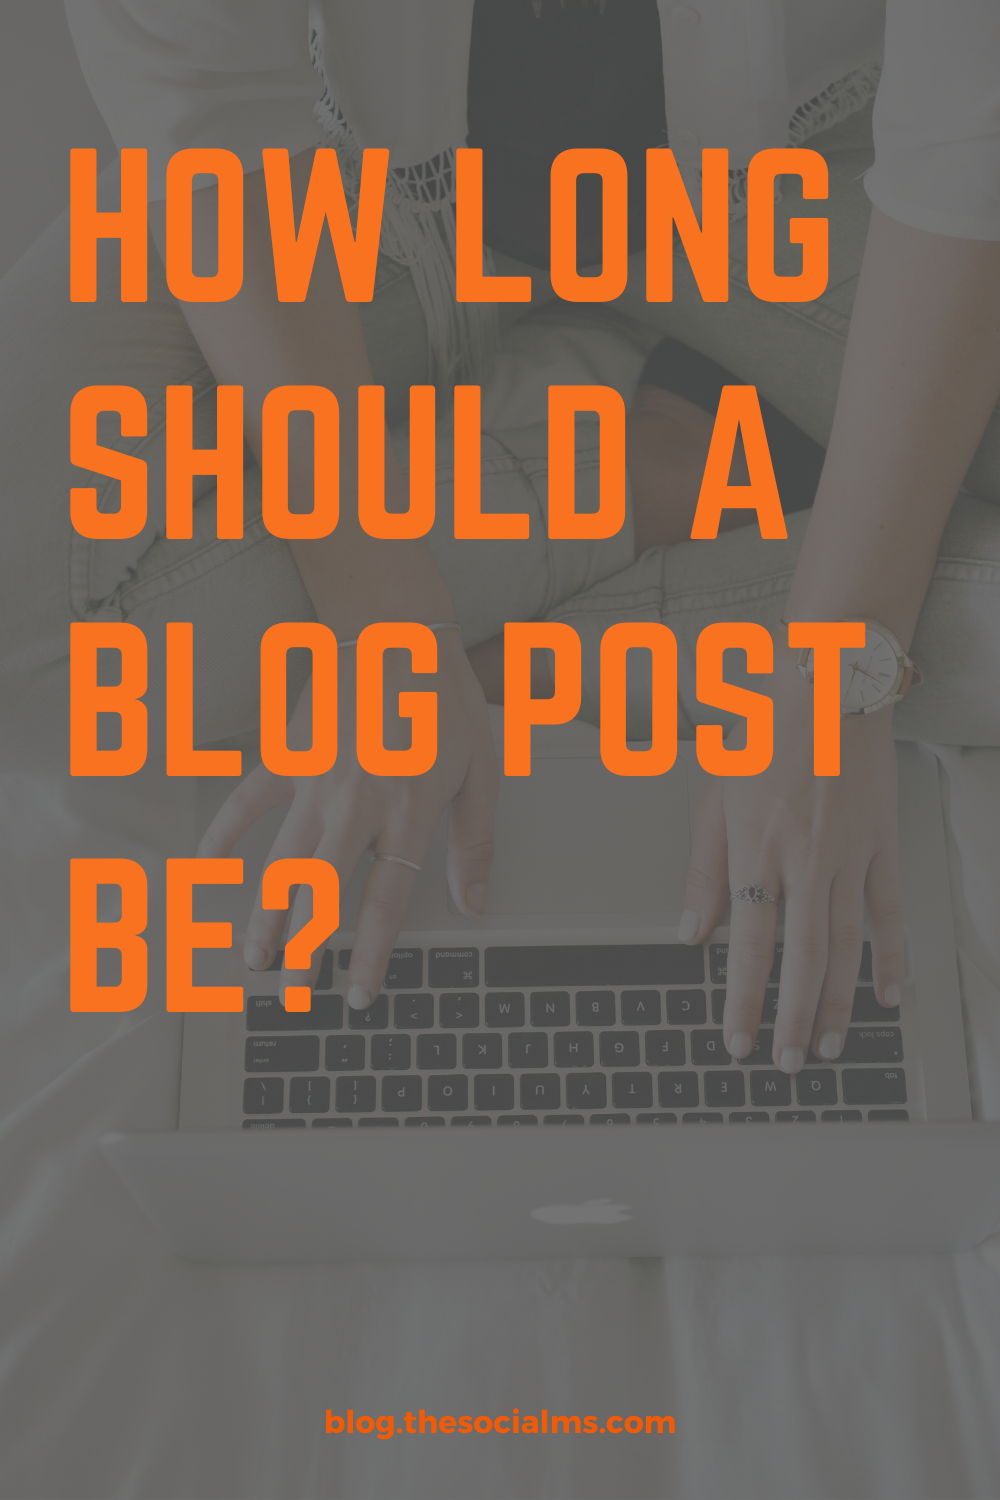 What number of words is an absolute minimum for a perfect blog post and what blog post length should you aim for? How long should your blog posts be? #blogpostcreation #contentcreation #blogwriting #blogging101 #bloggingtips #bloggingforbeginners #startablog #blogpostlength